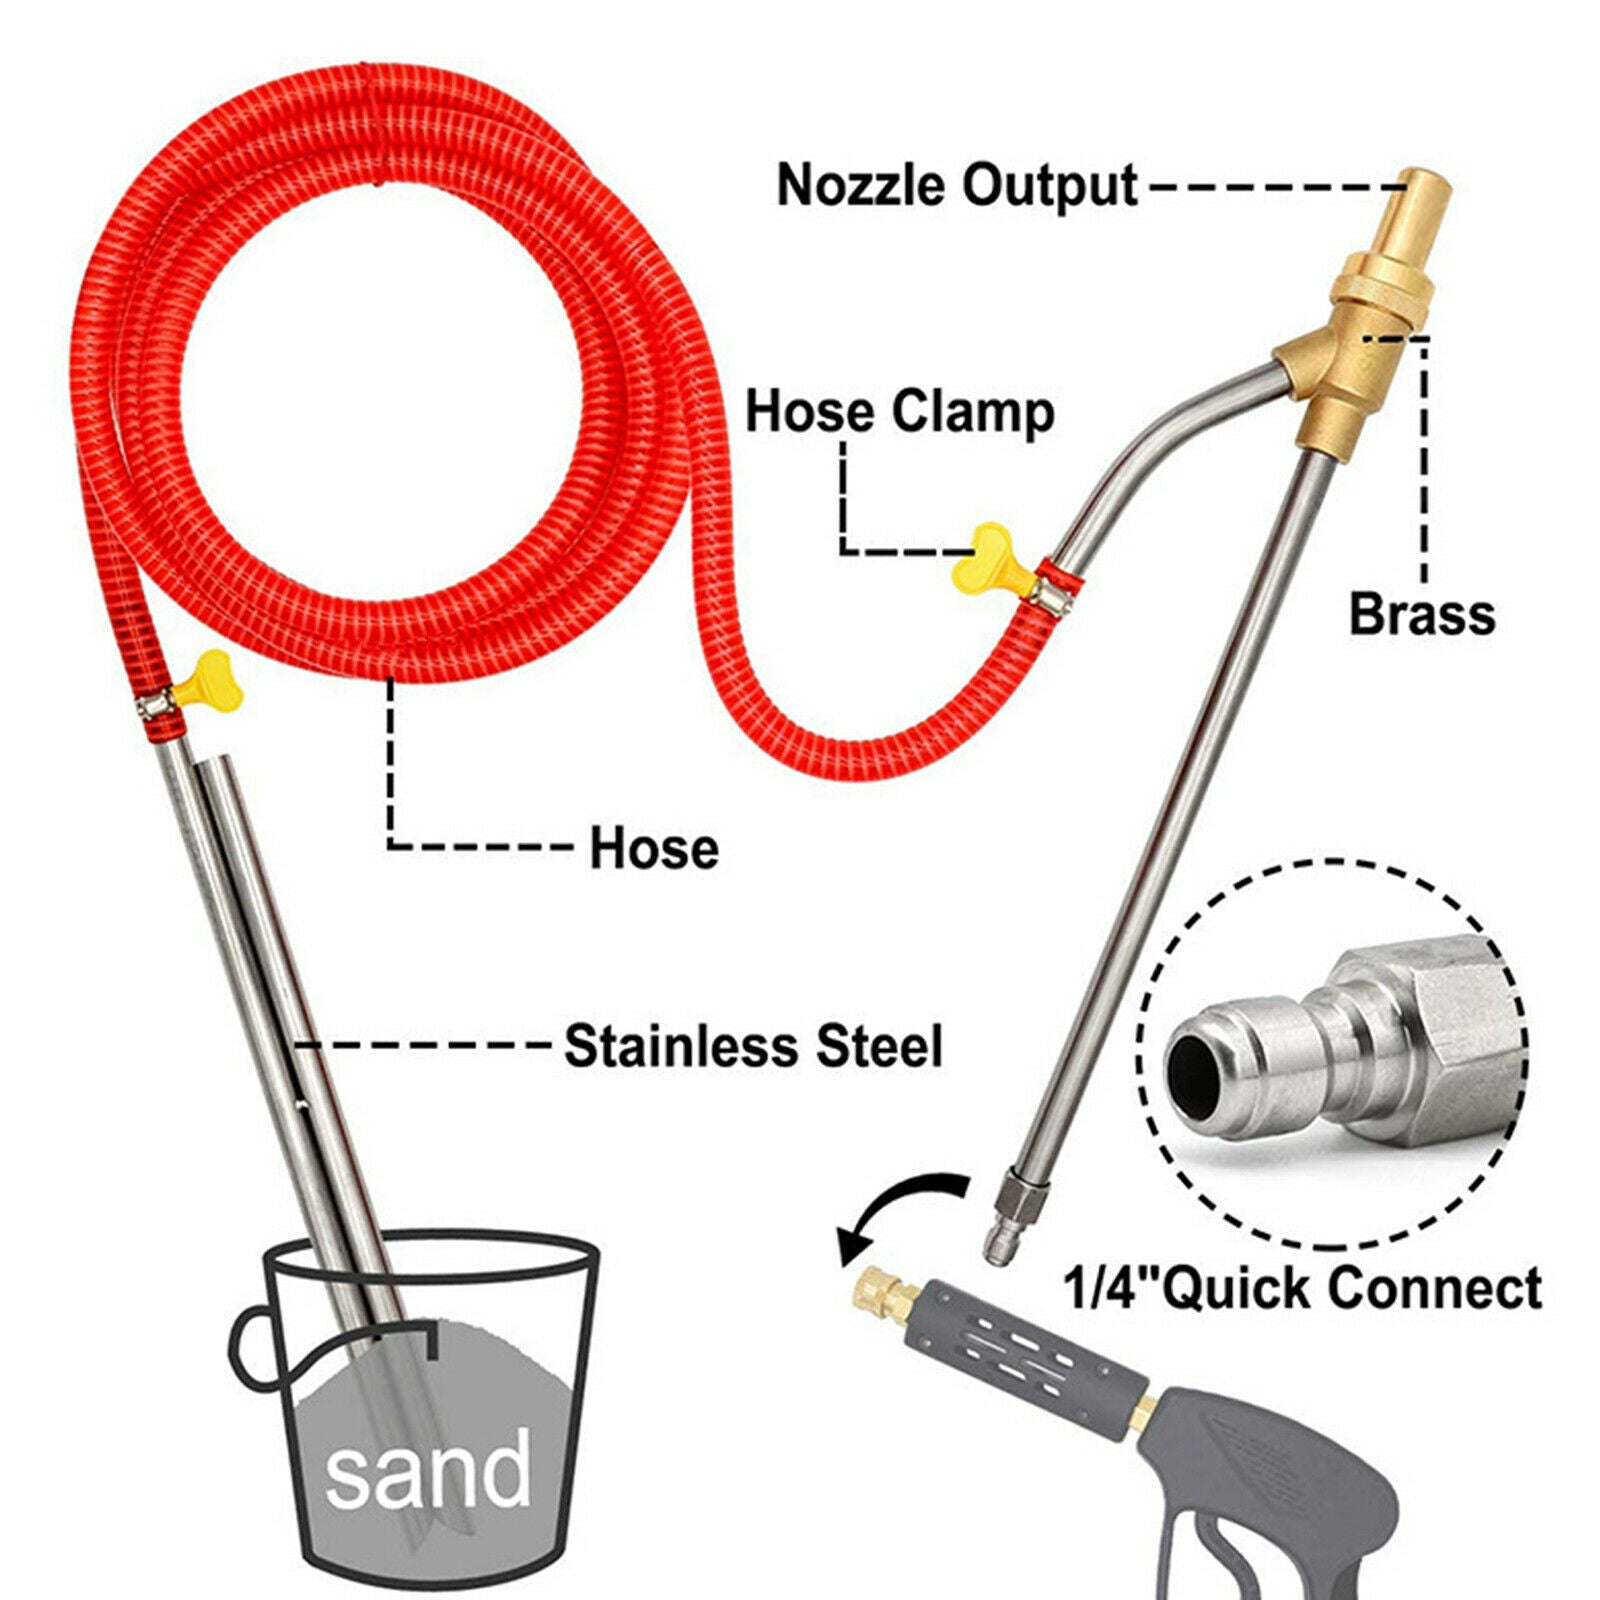 Pressure Washer Sandblasting Kit Wet 5000 PSI, with 1/4inch Quick Disconnect,